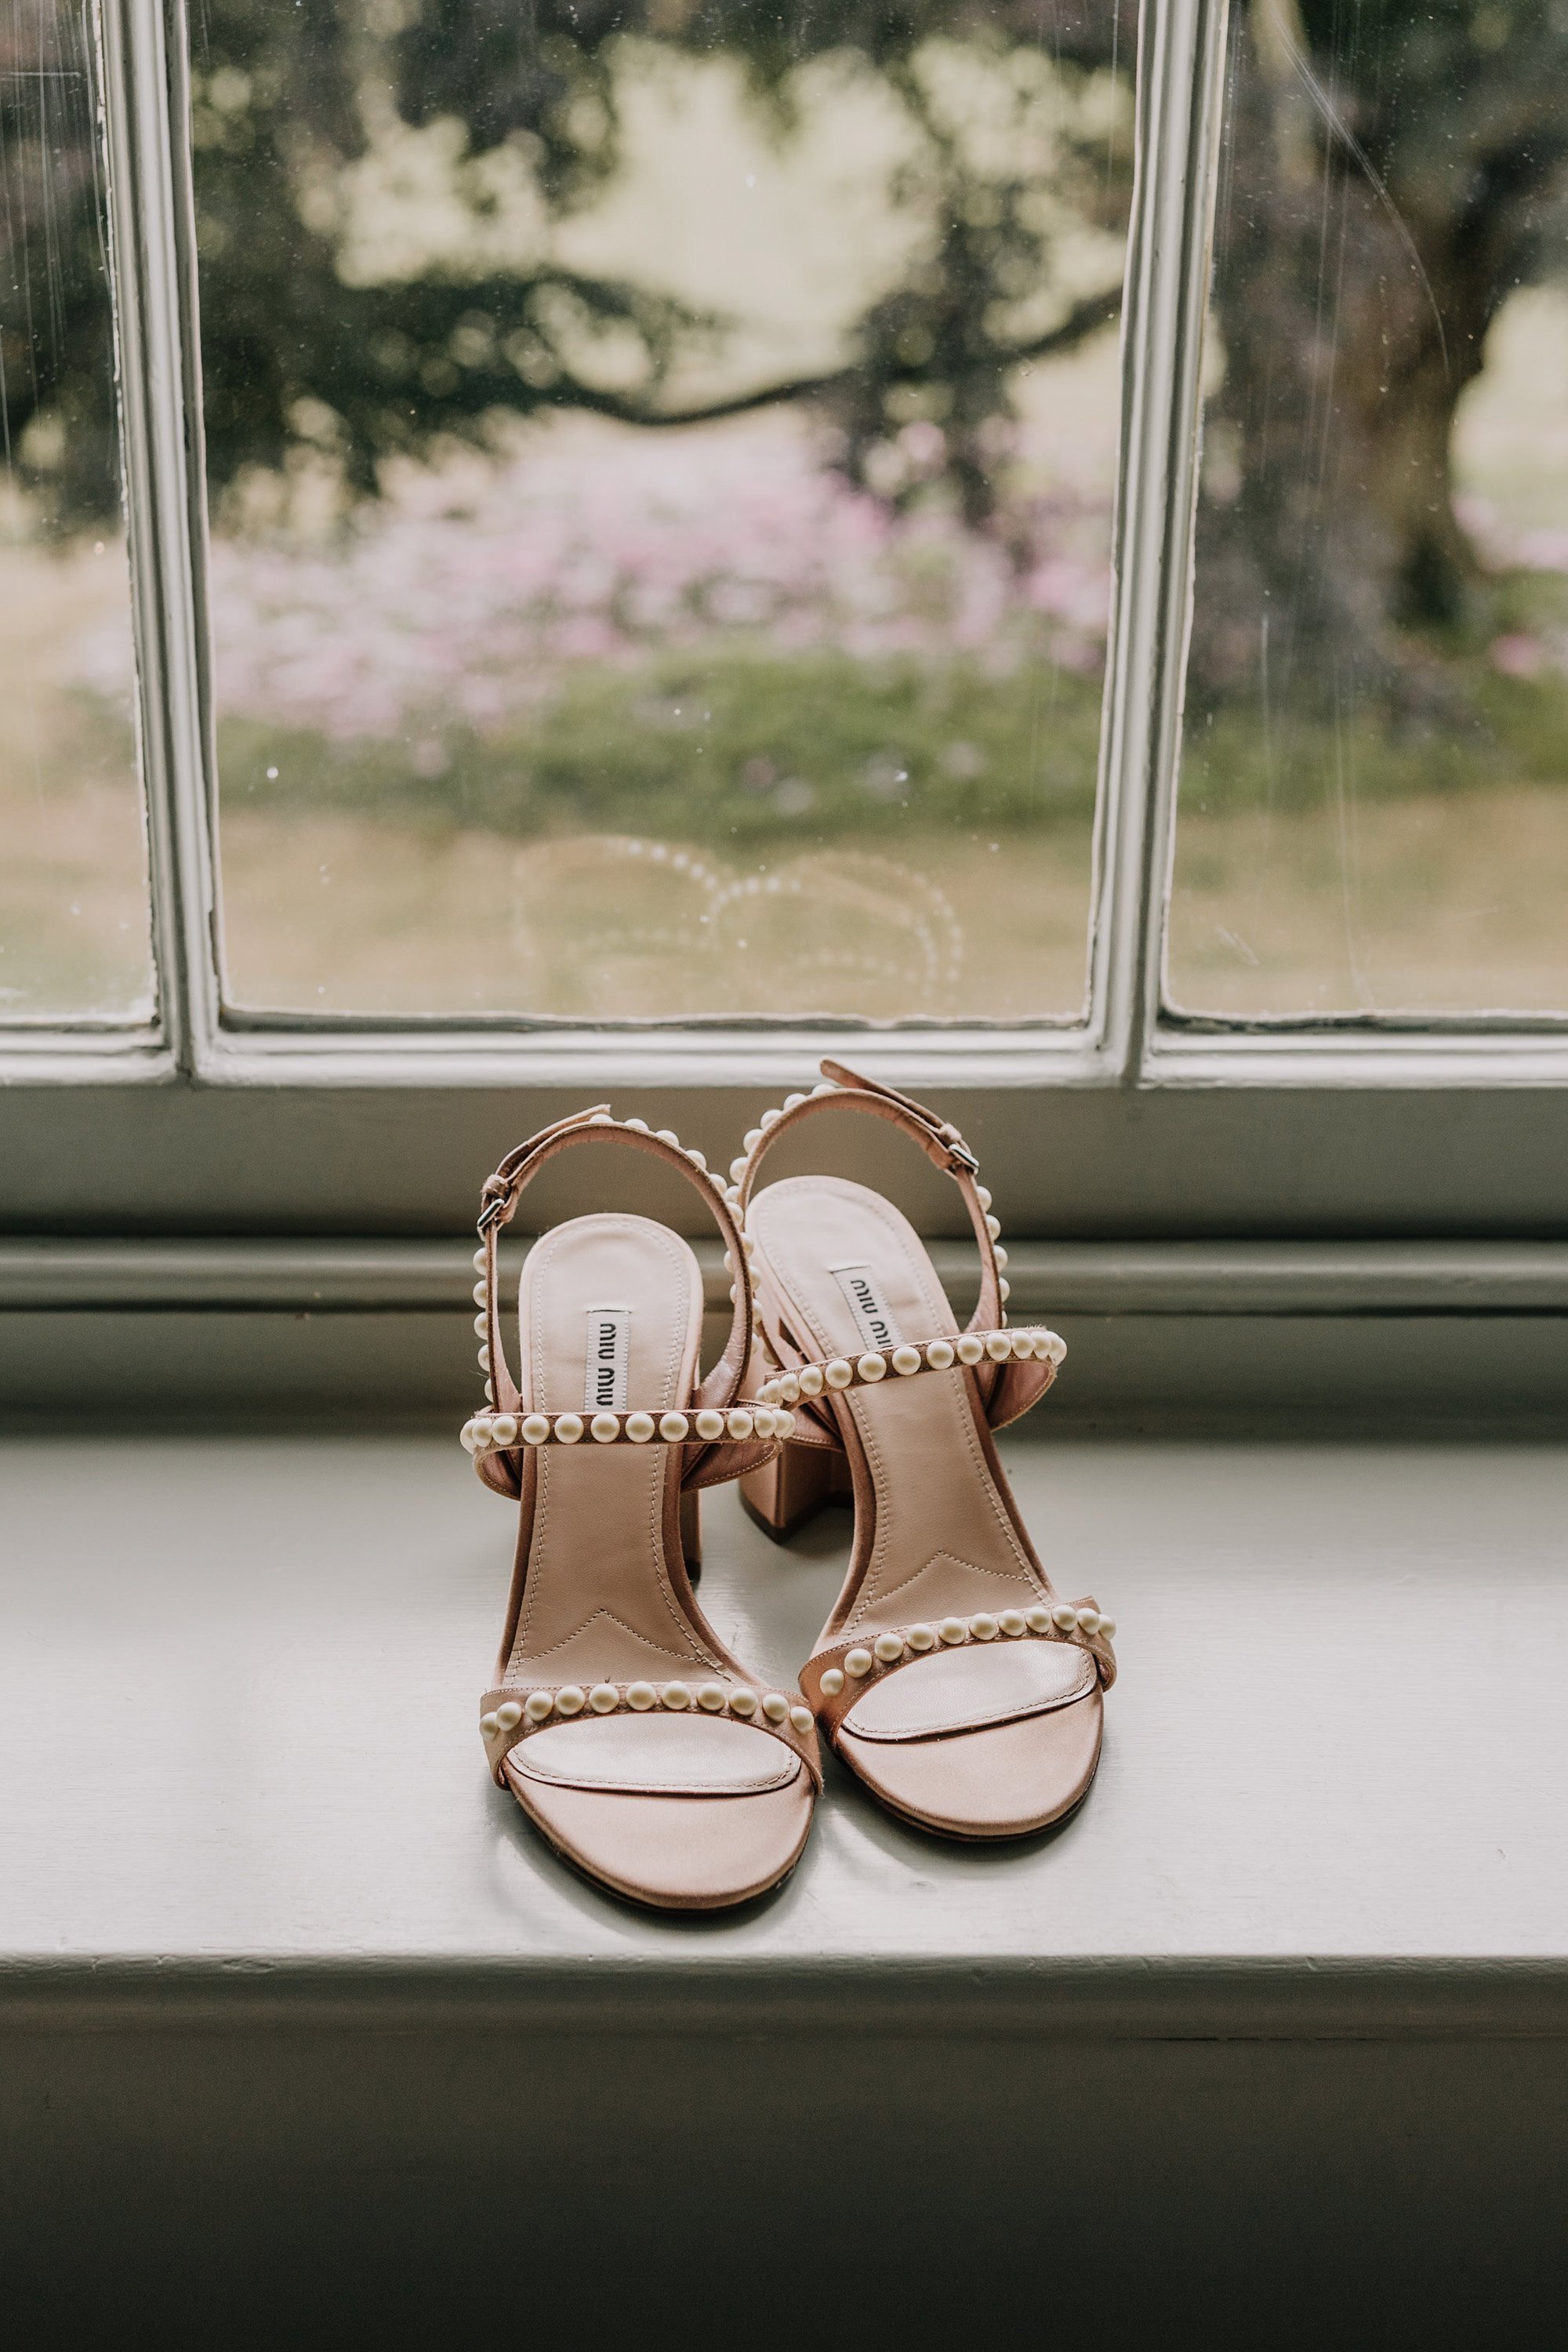 Delicate pearl wedding shoes with pearl straps by Miu Miu on windowsill of stately home wedding venue